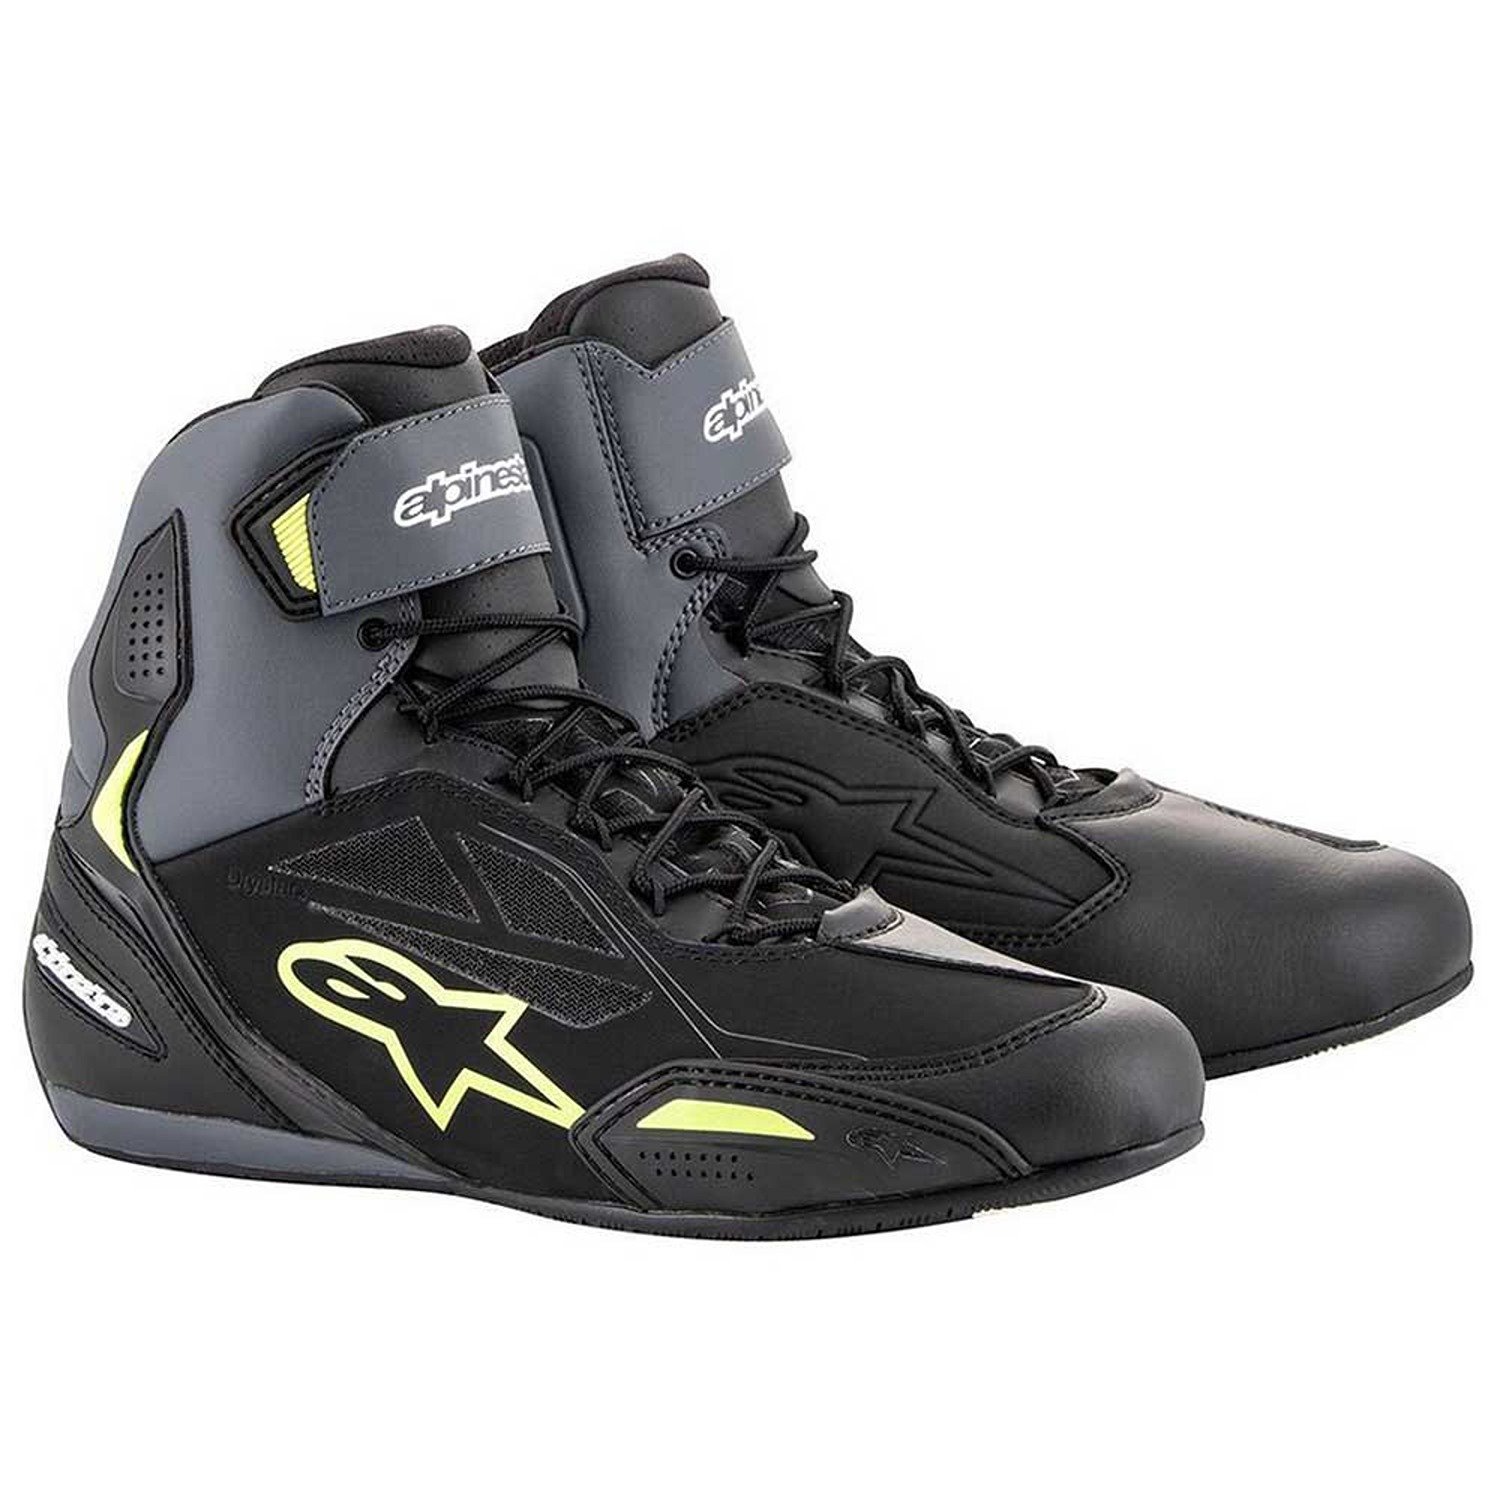 Image of Alpinestars Faster-3 Shoes Black Yellow Fluo Size US 7 ID 8059347331058